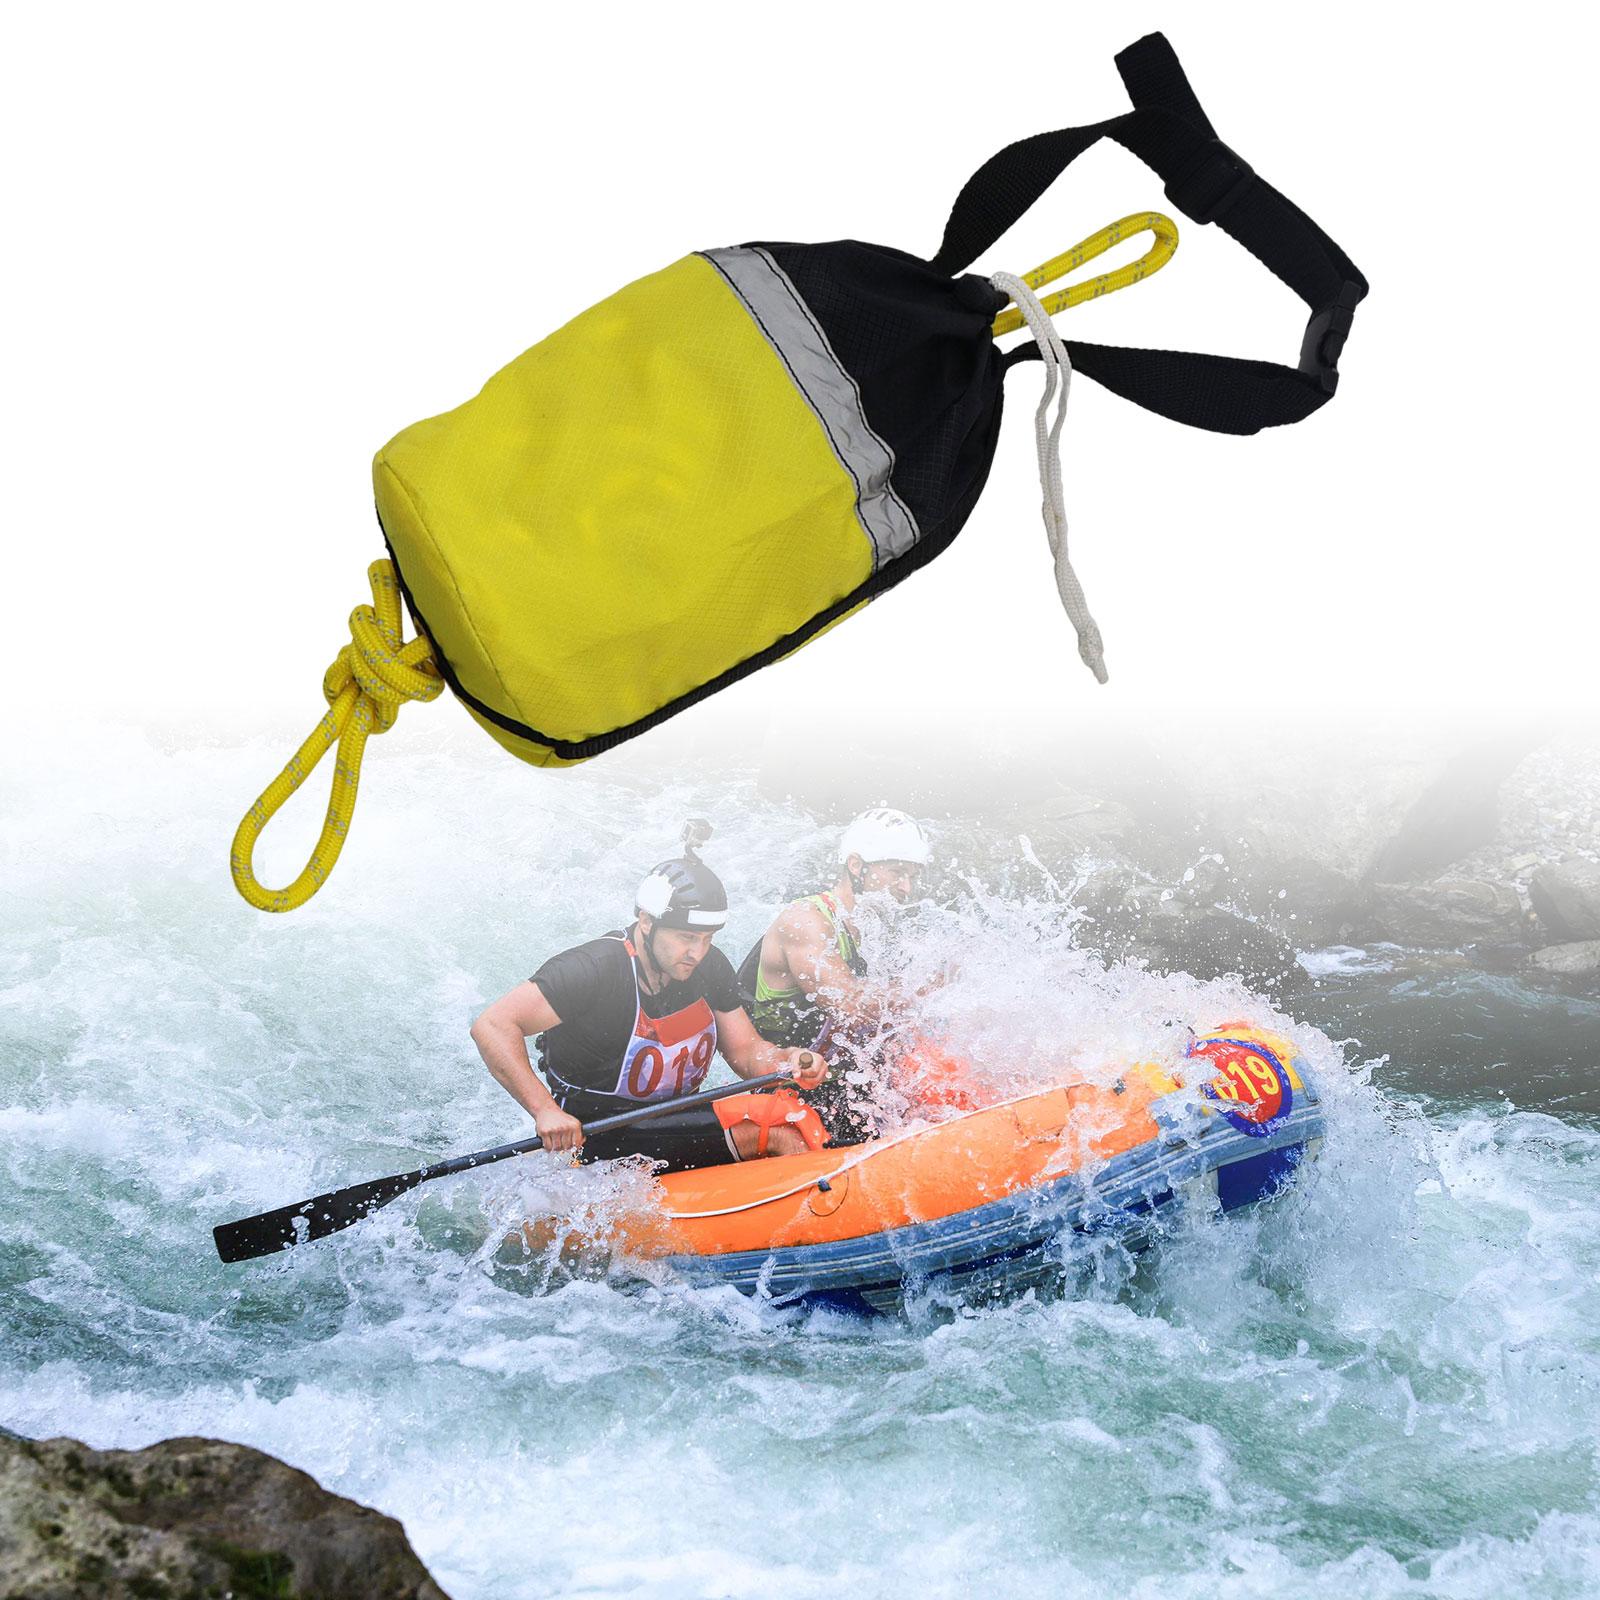 Rescue Throw Bag, Floating Rope Polypropylene Throwing Line Throwable Safety